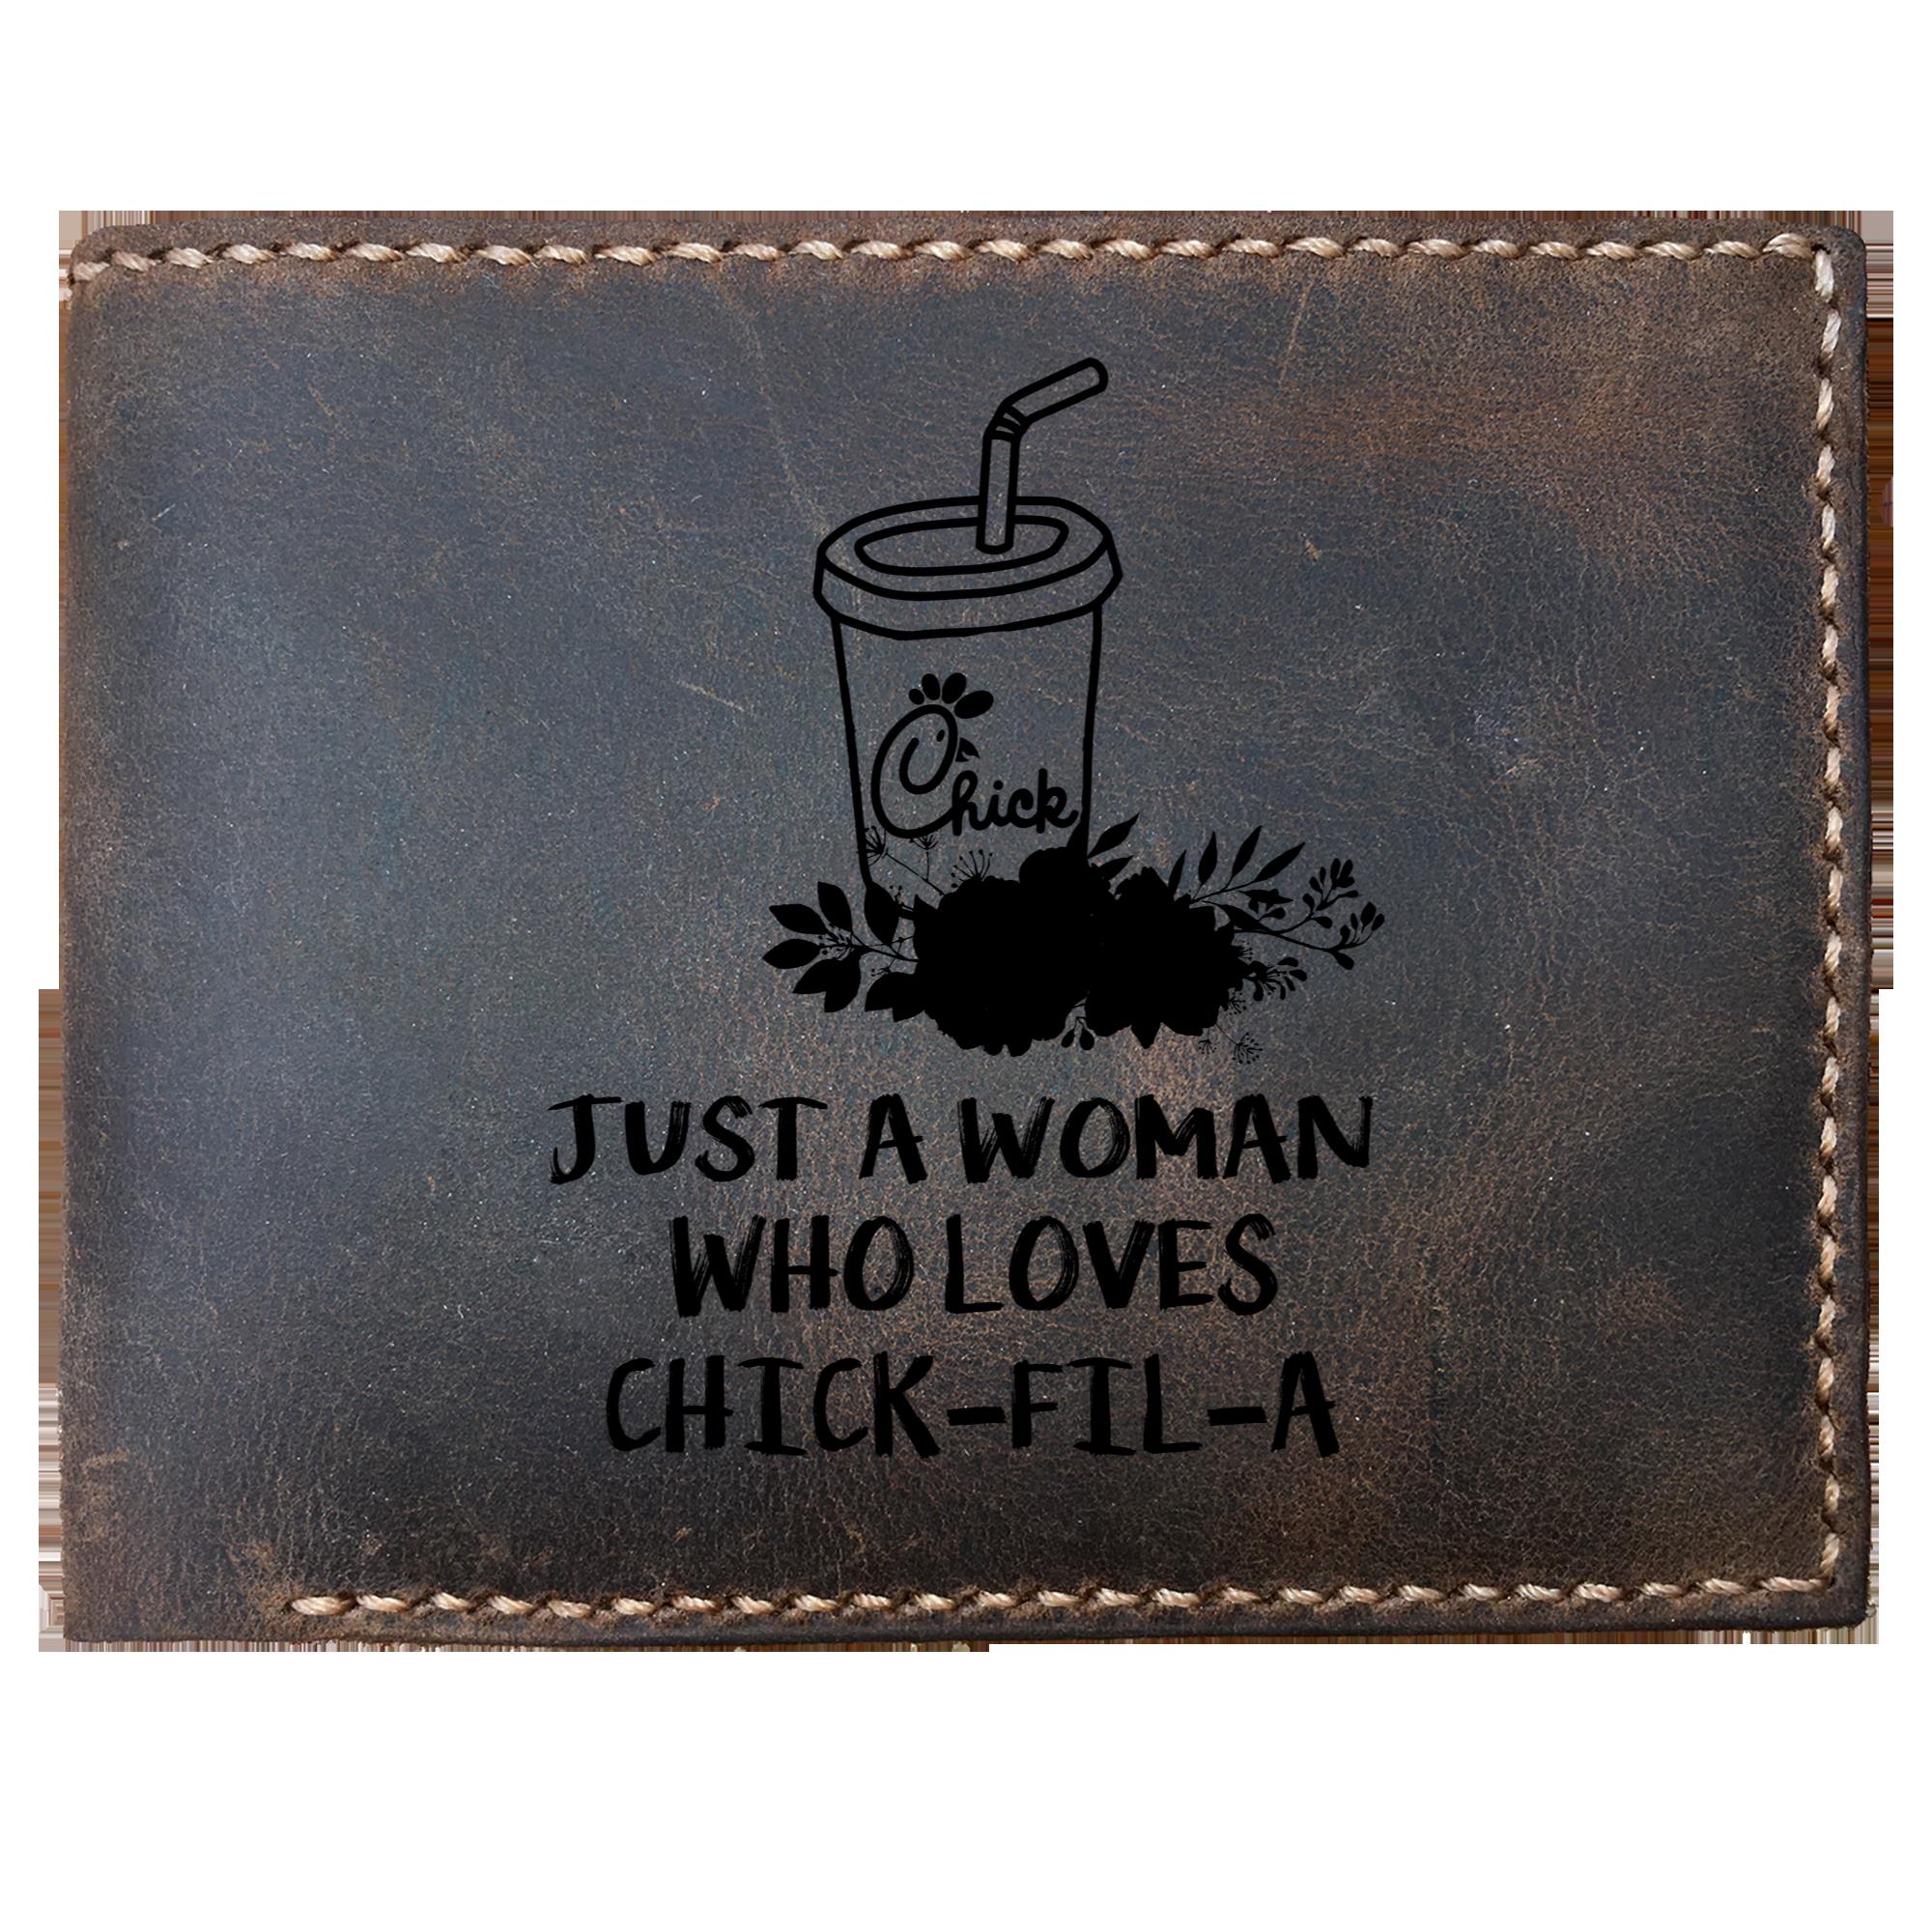 Skitongifts Funny Custom Laser Engraved Bifold Leather Wallet For Men, Just A Woman Who Loves Chickfila